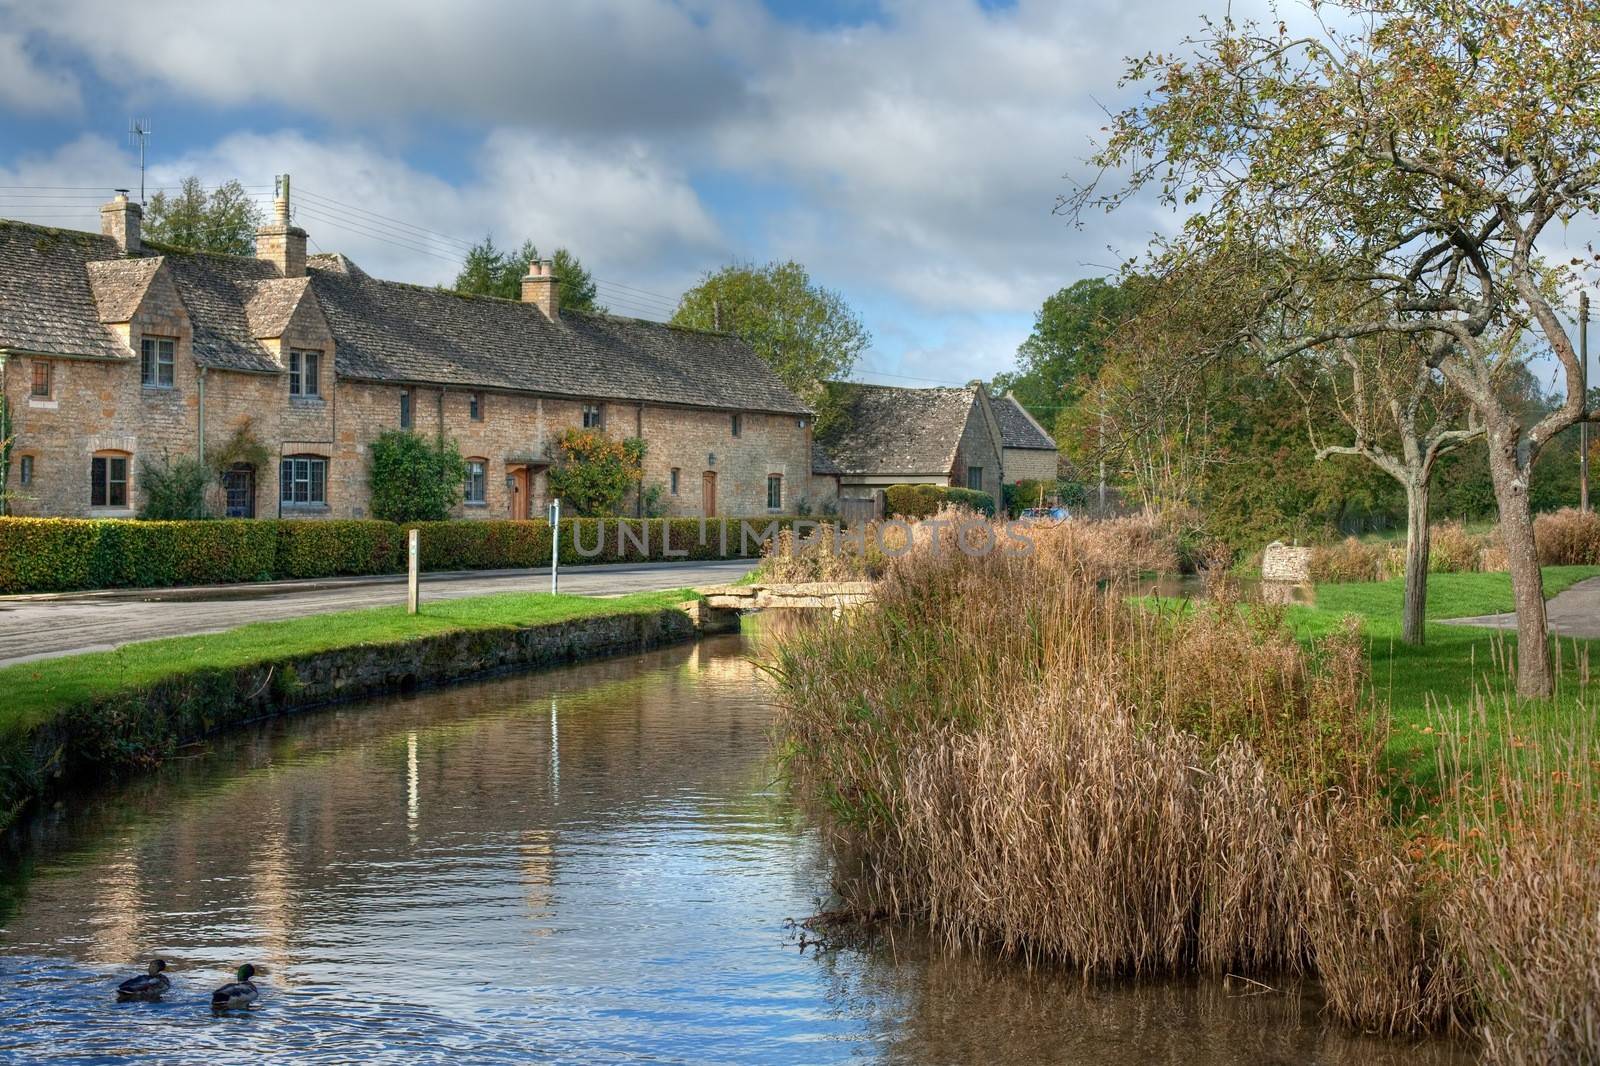 The pretty Cotswold village of Lower Slaughter near Bourton on the water, Gloucester, England.